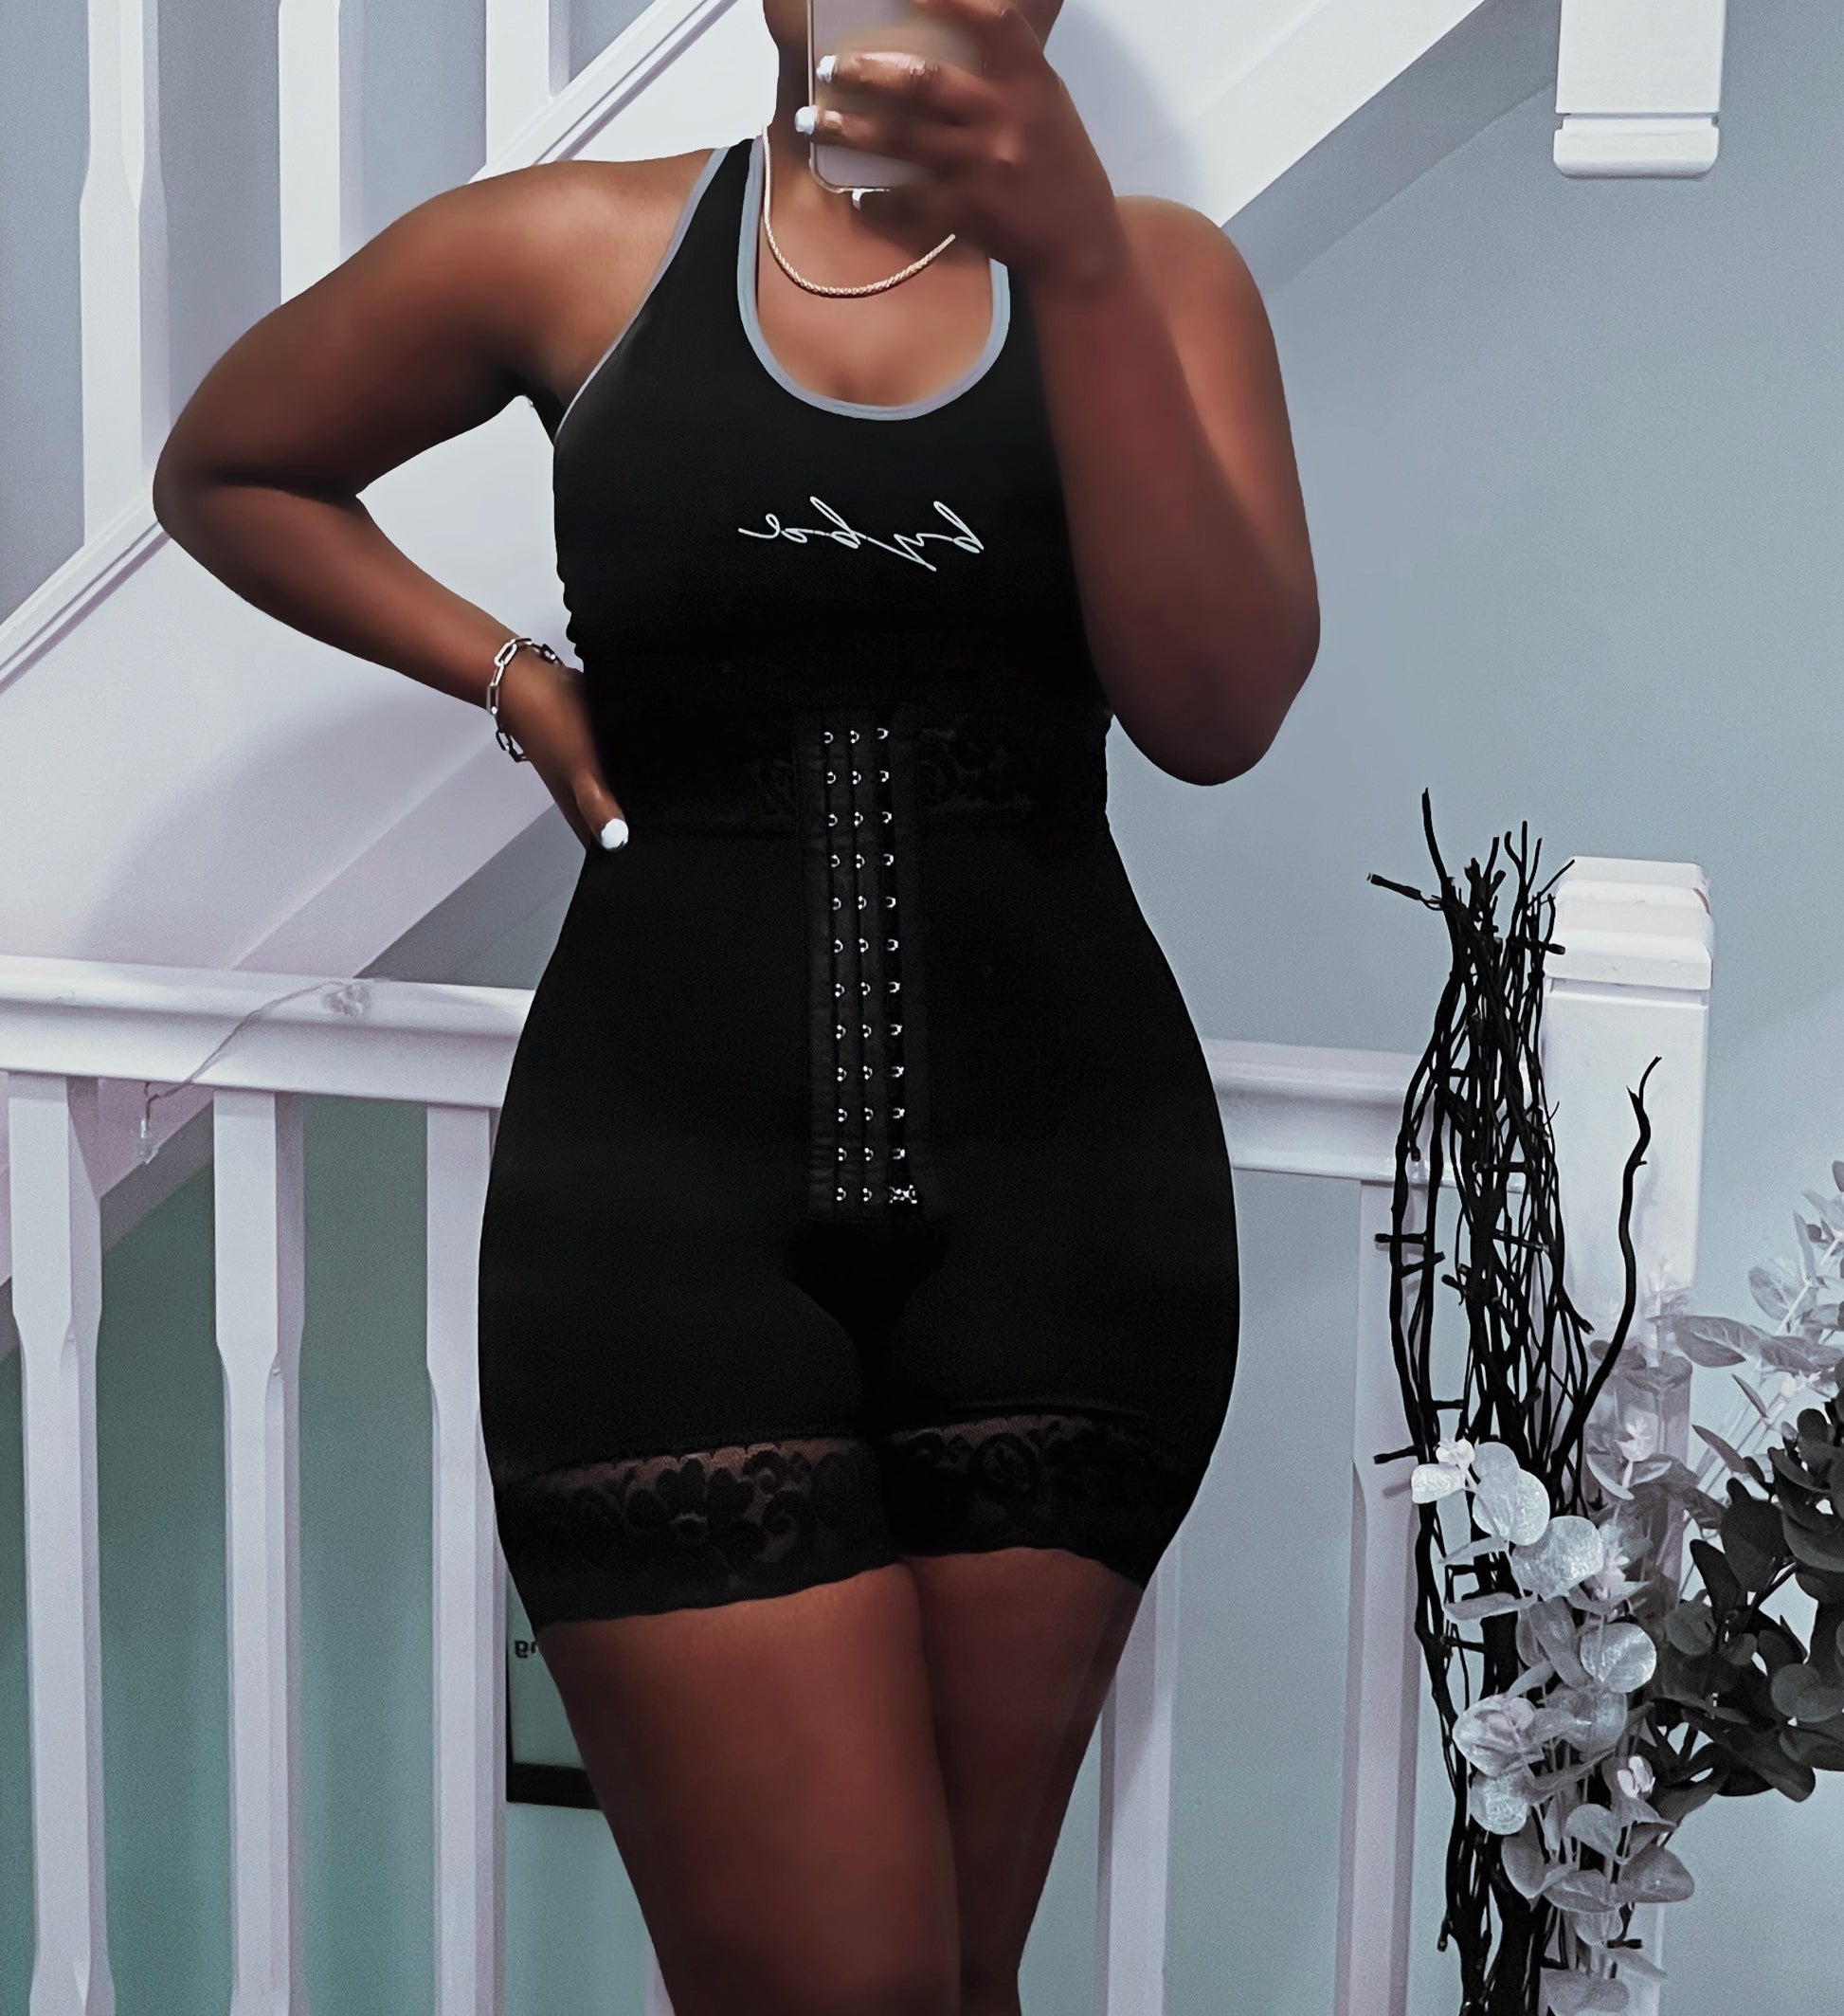 Flash sale for our snatch me body shapewear Available in our TikTok sh